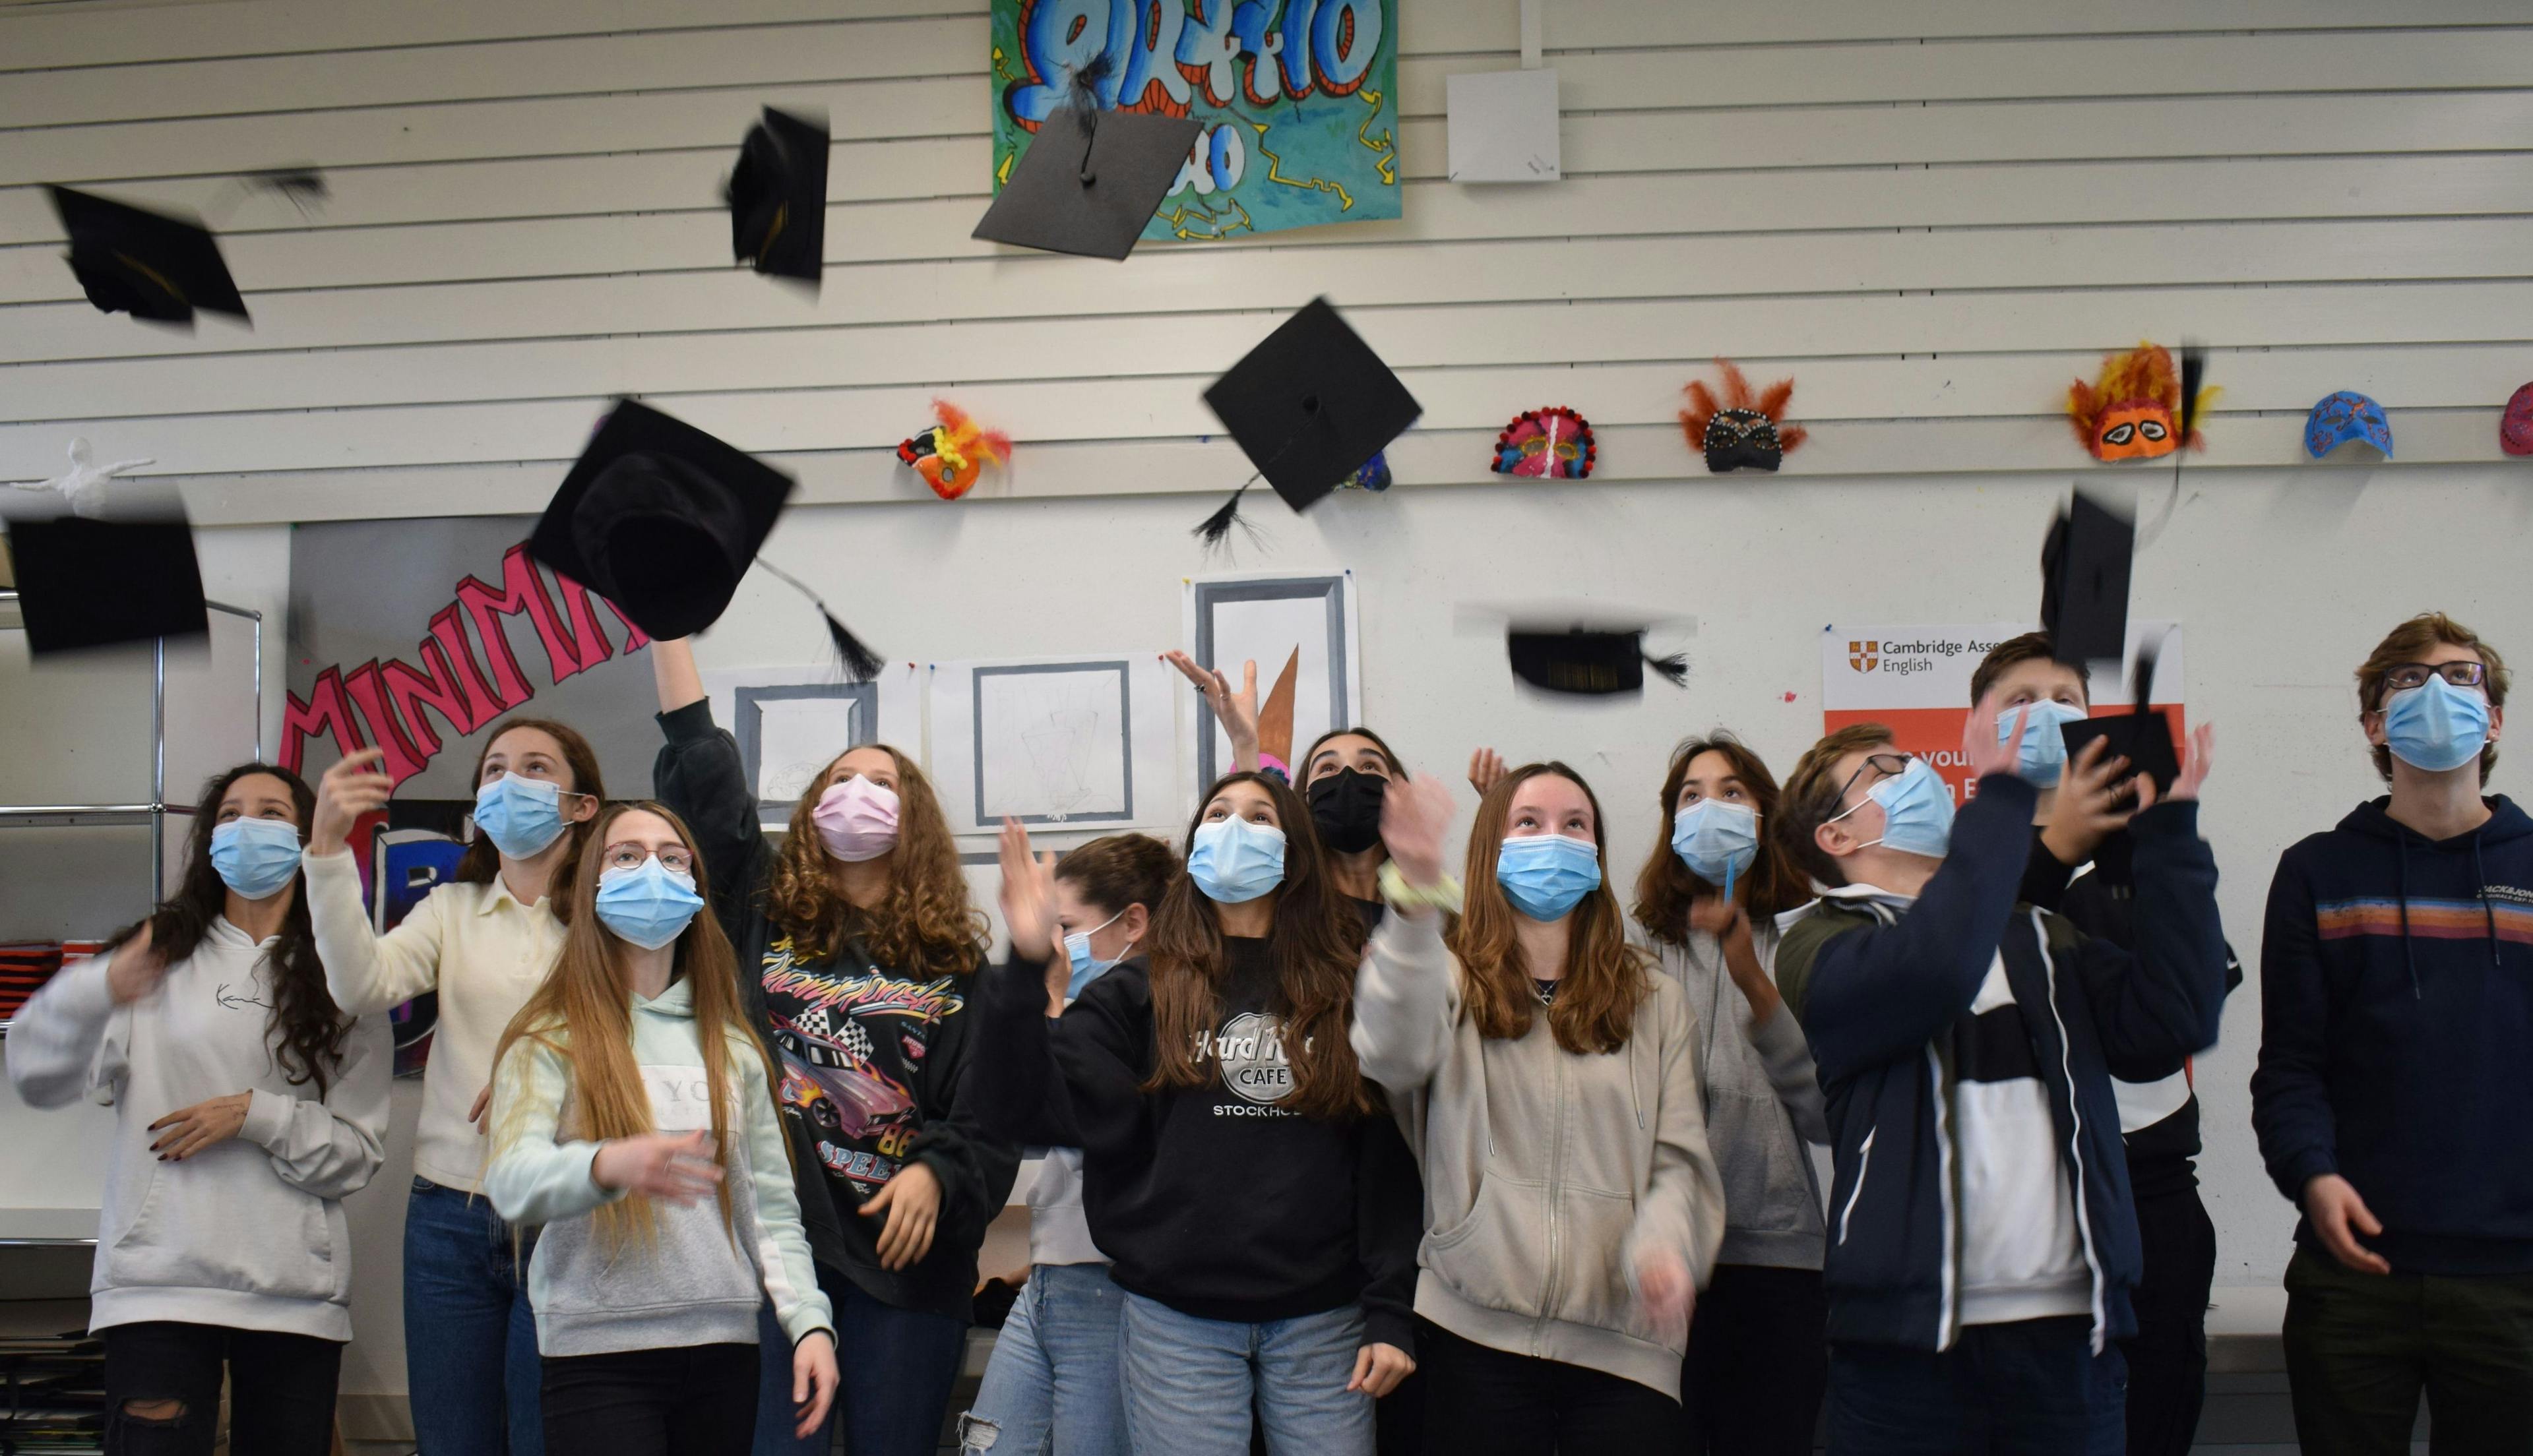 Students from the Sekundarschule have passed their Cambridge English Exam with distinction. They are in their classroom and throw black graduation hats.